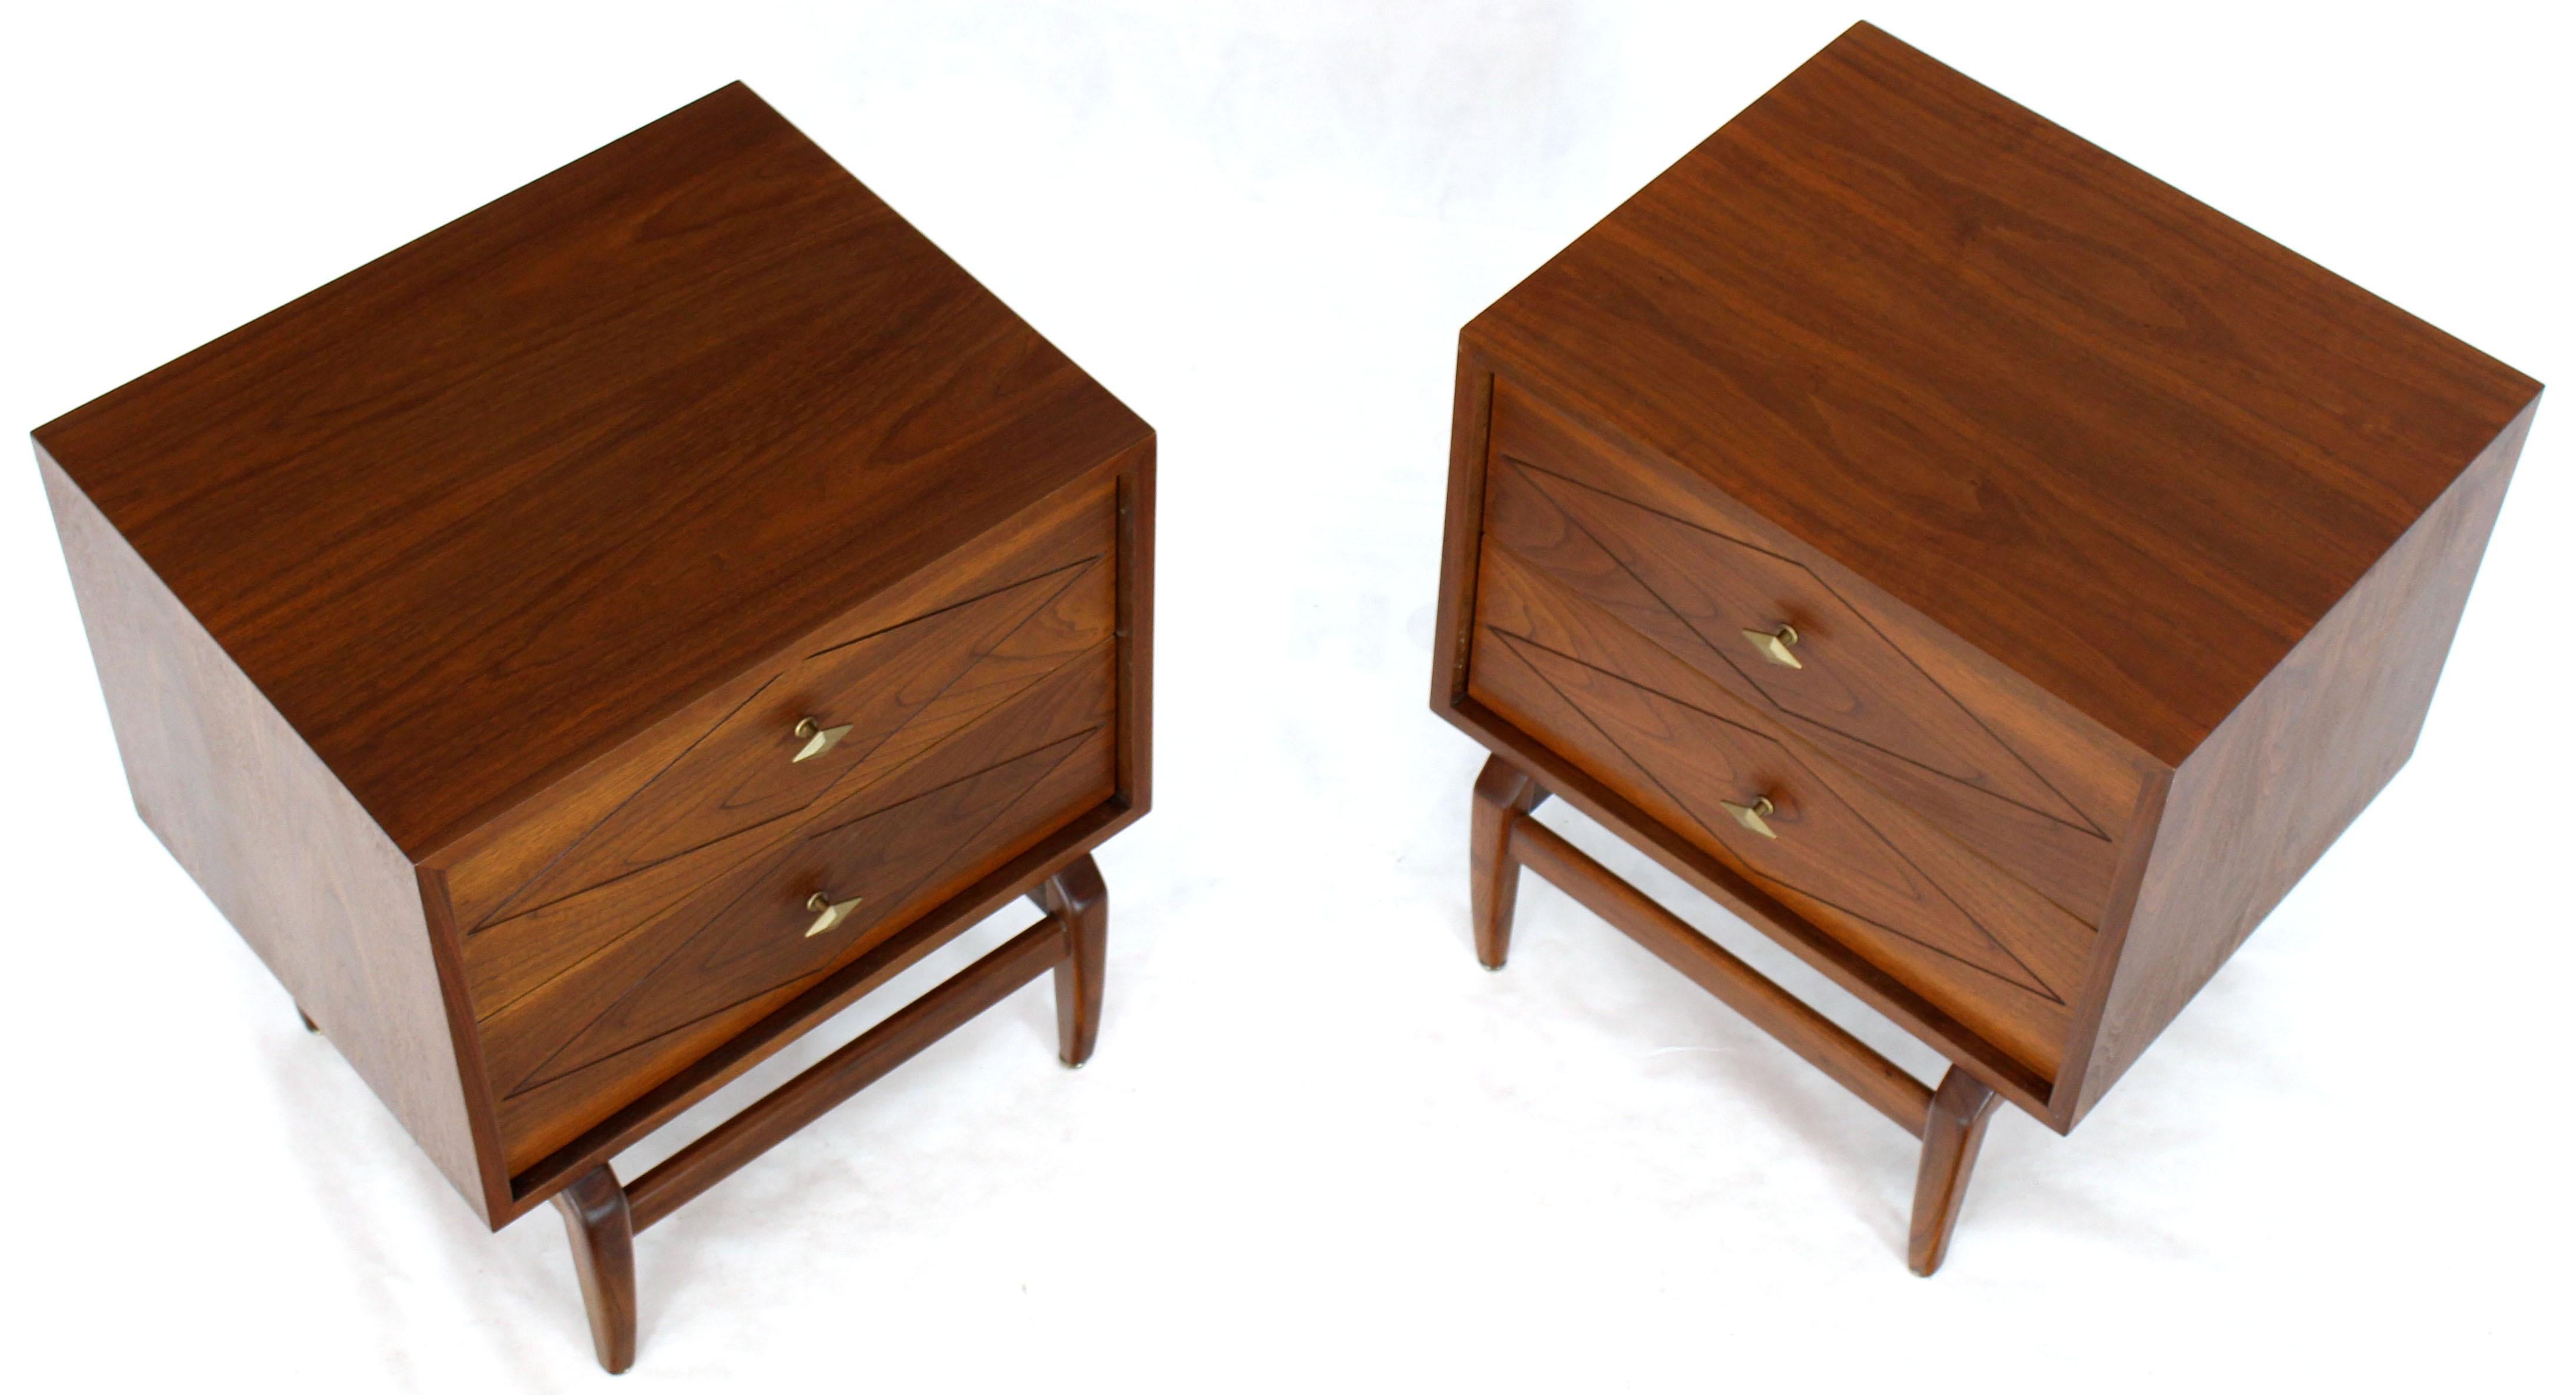 Lacquered Diamond Pattern Cube Shape Walnut End Tables Stands Solid Sculptural Legs Pair